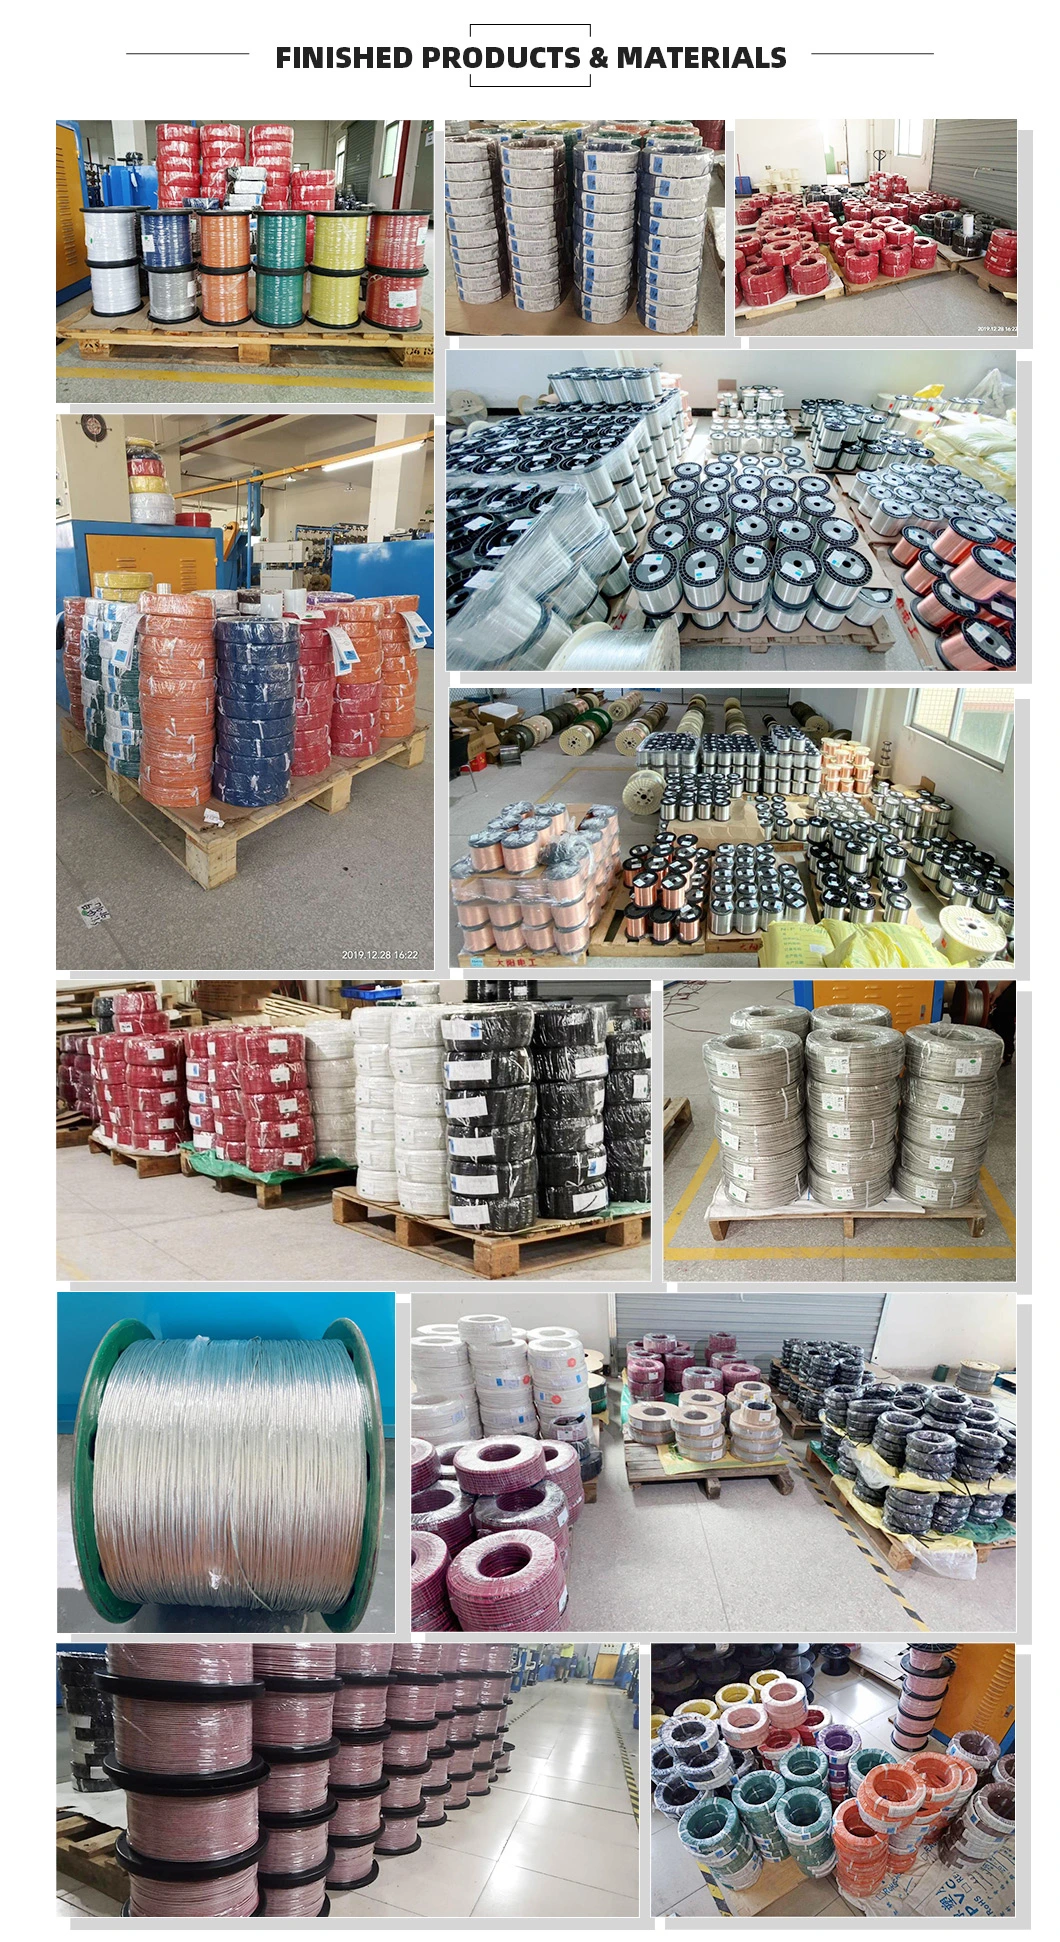 UL1007 Twisted Wire Copper Conductor Wire Lead Wire PVC Insulated Wire and Cable for Awm